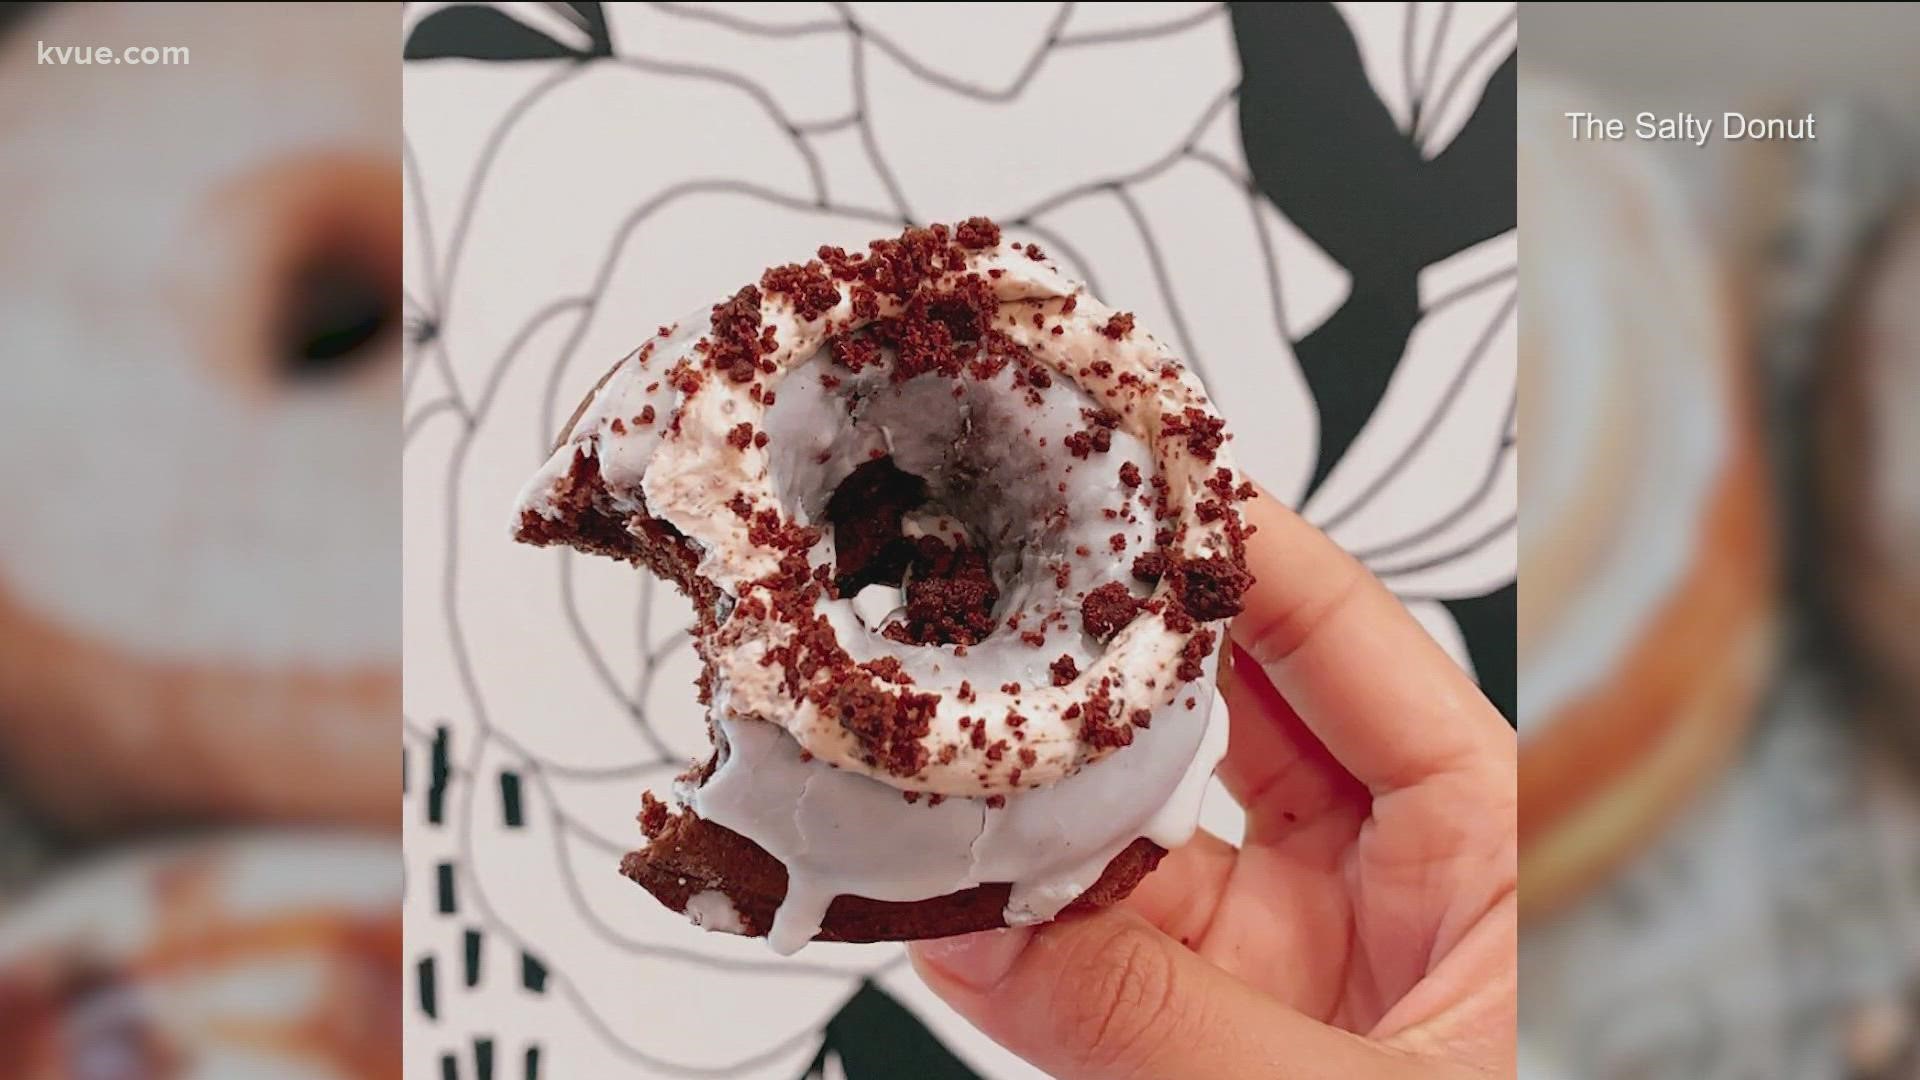 Another donut business is setting up shop in Austin. Miami-based The Salty Donut is opening a South Congress location on Aug. 27.